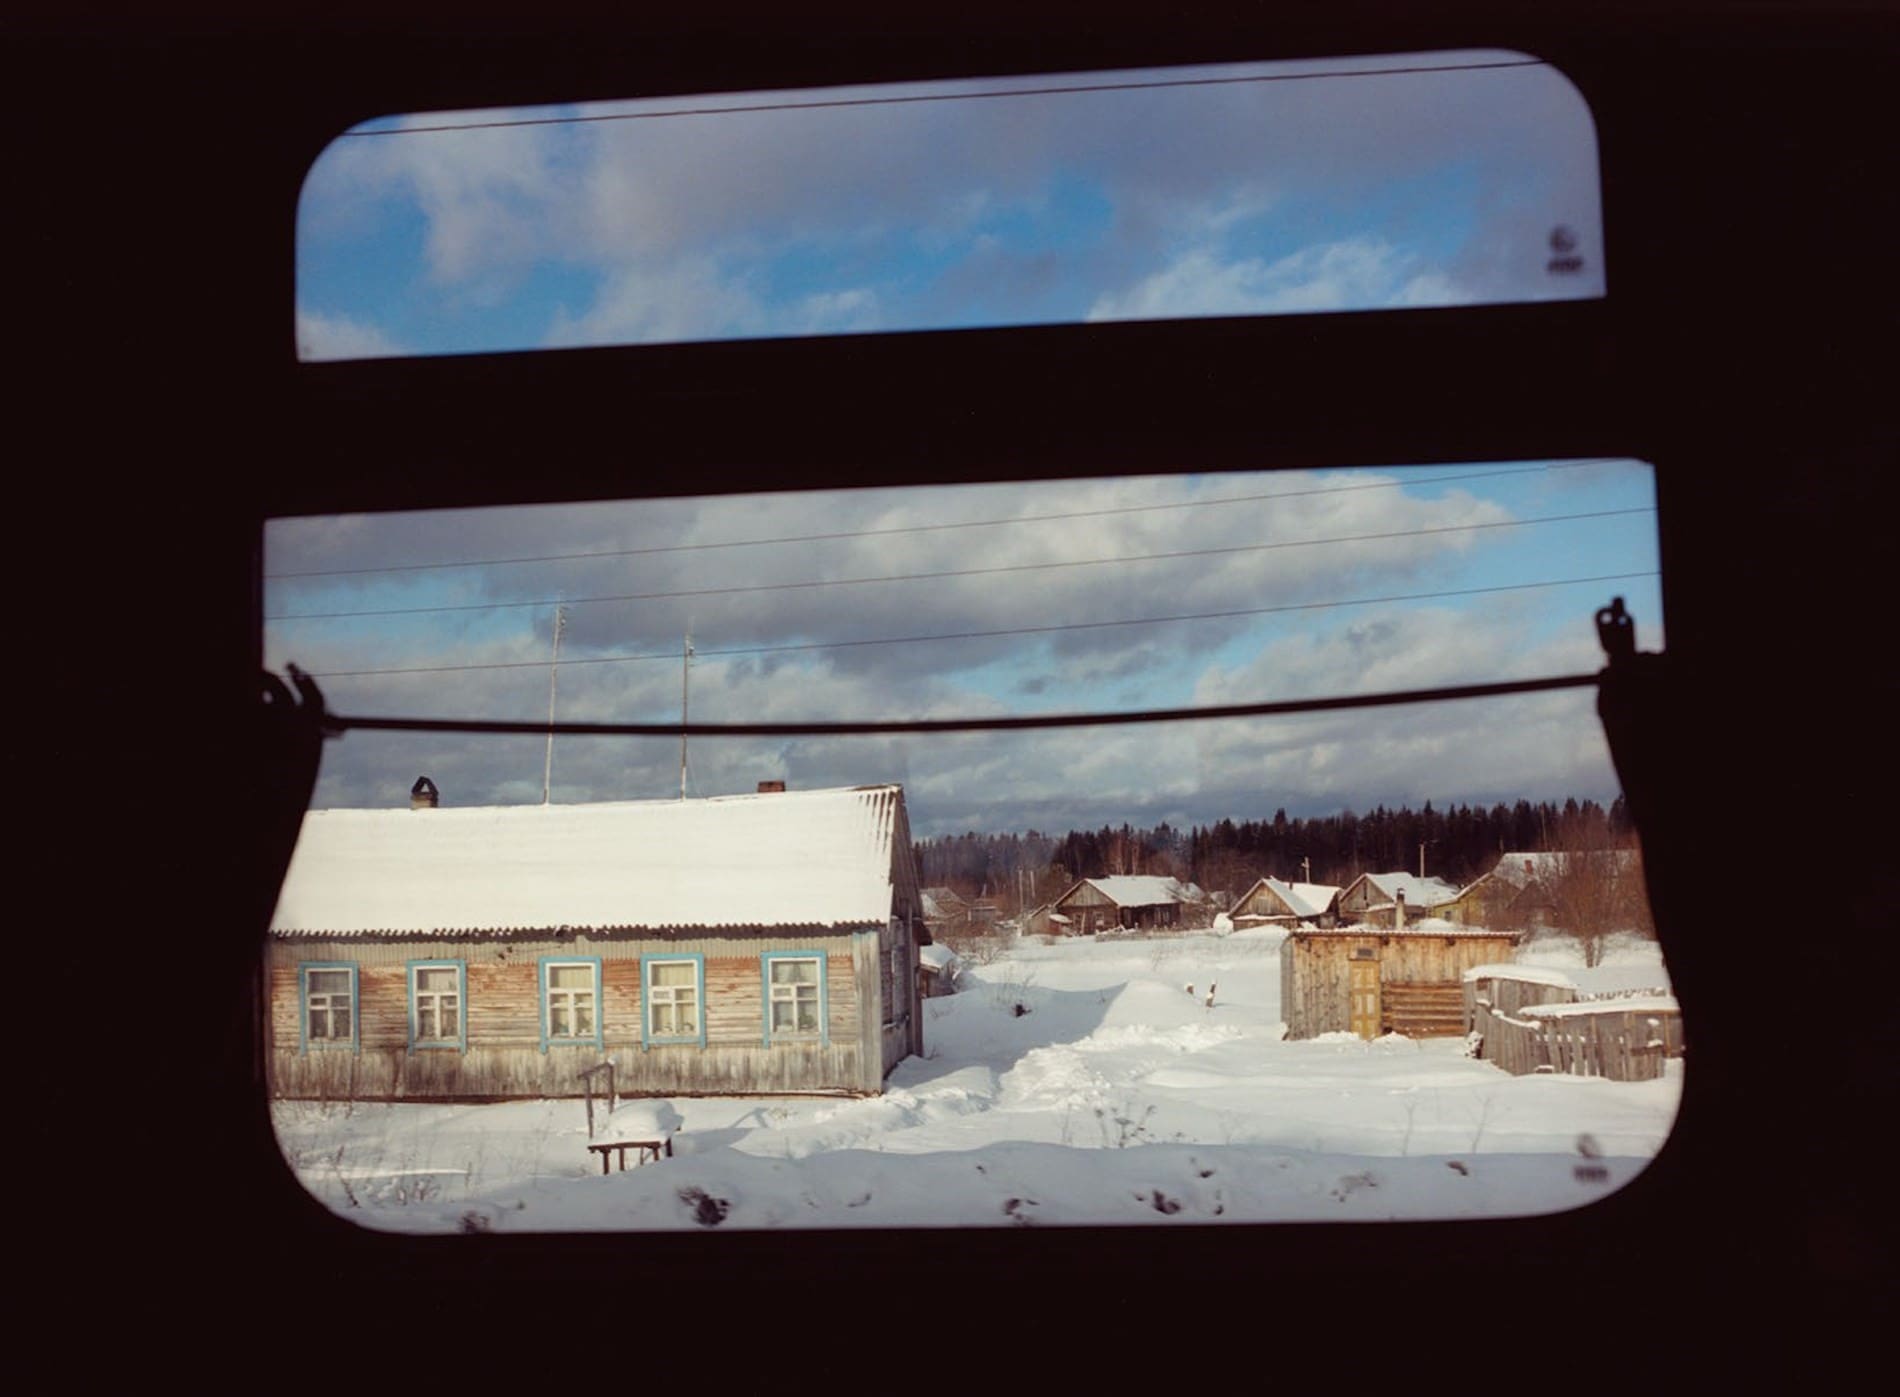 Coco Capitan | A view through a train window of a snow-covered wooden house in Siberia